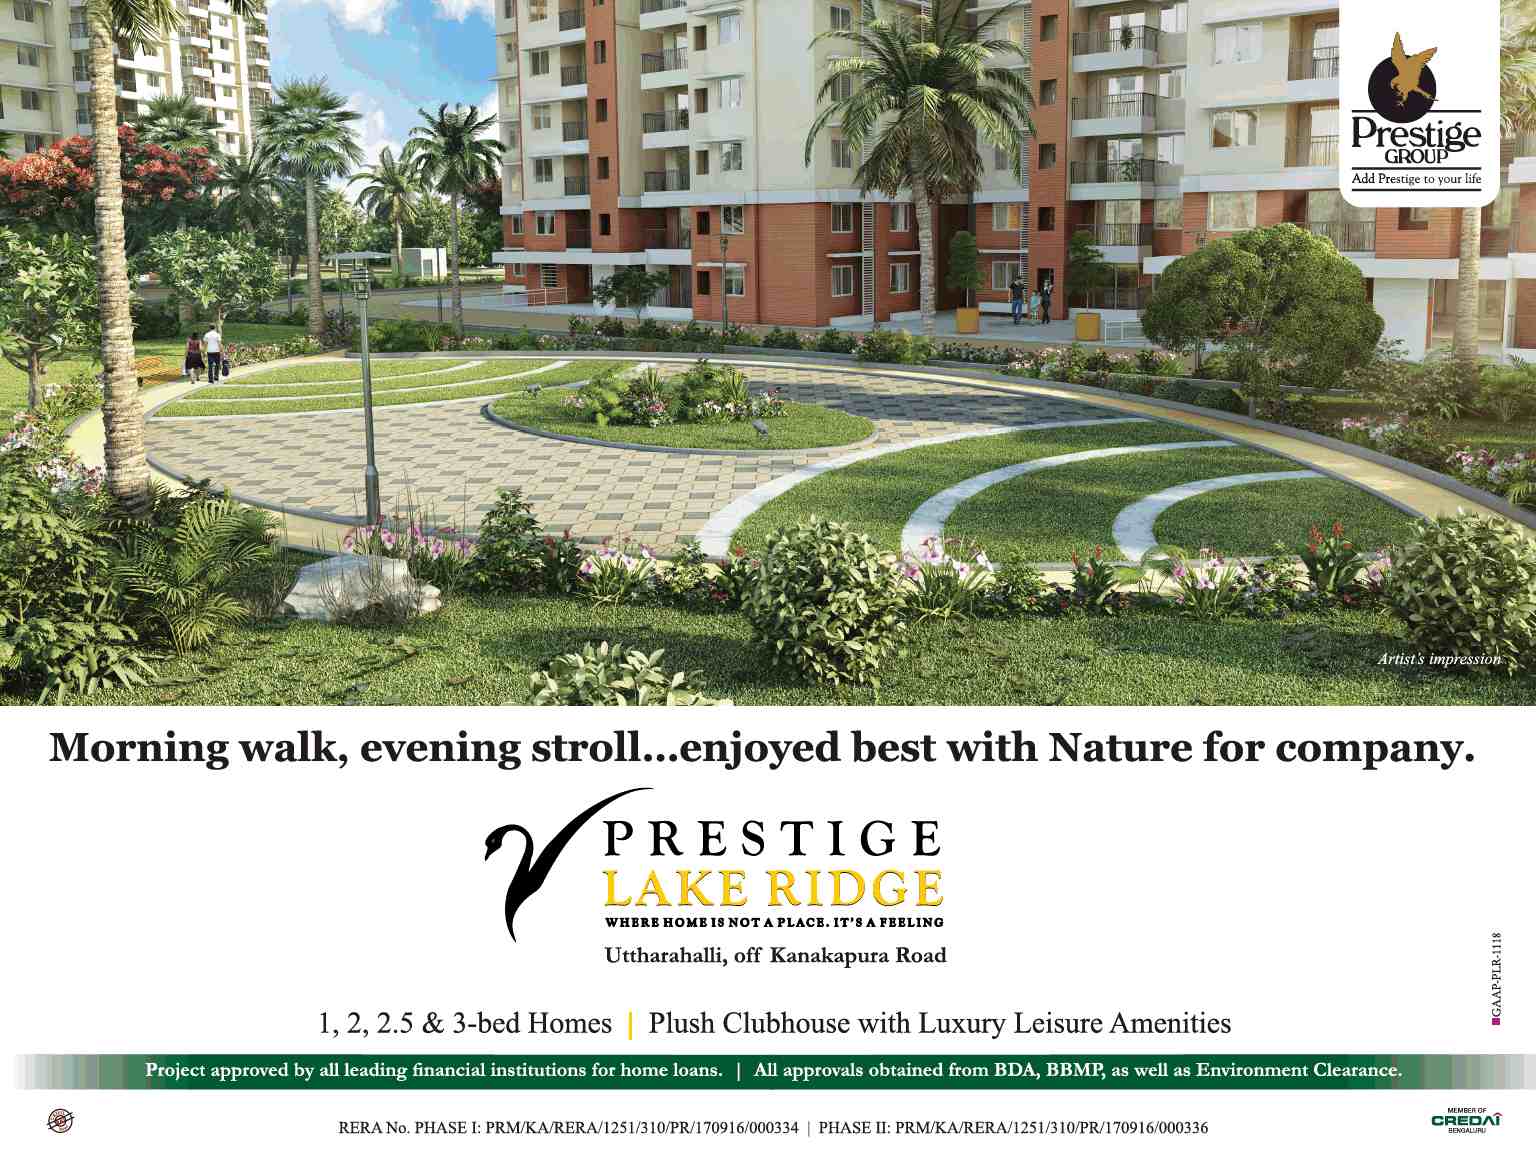 Enjoy morning and evening walk with nature's company at Prestige Lake Ridge in Bangalore Update